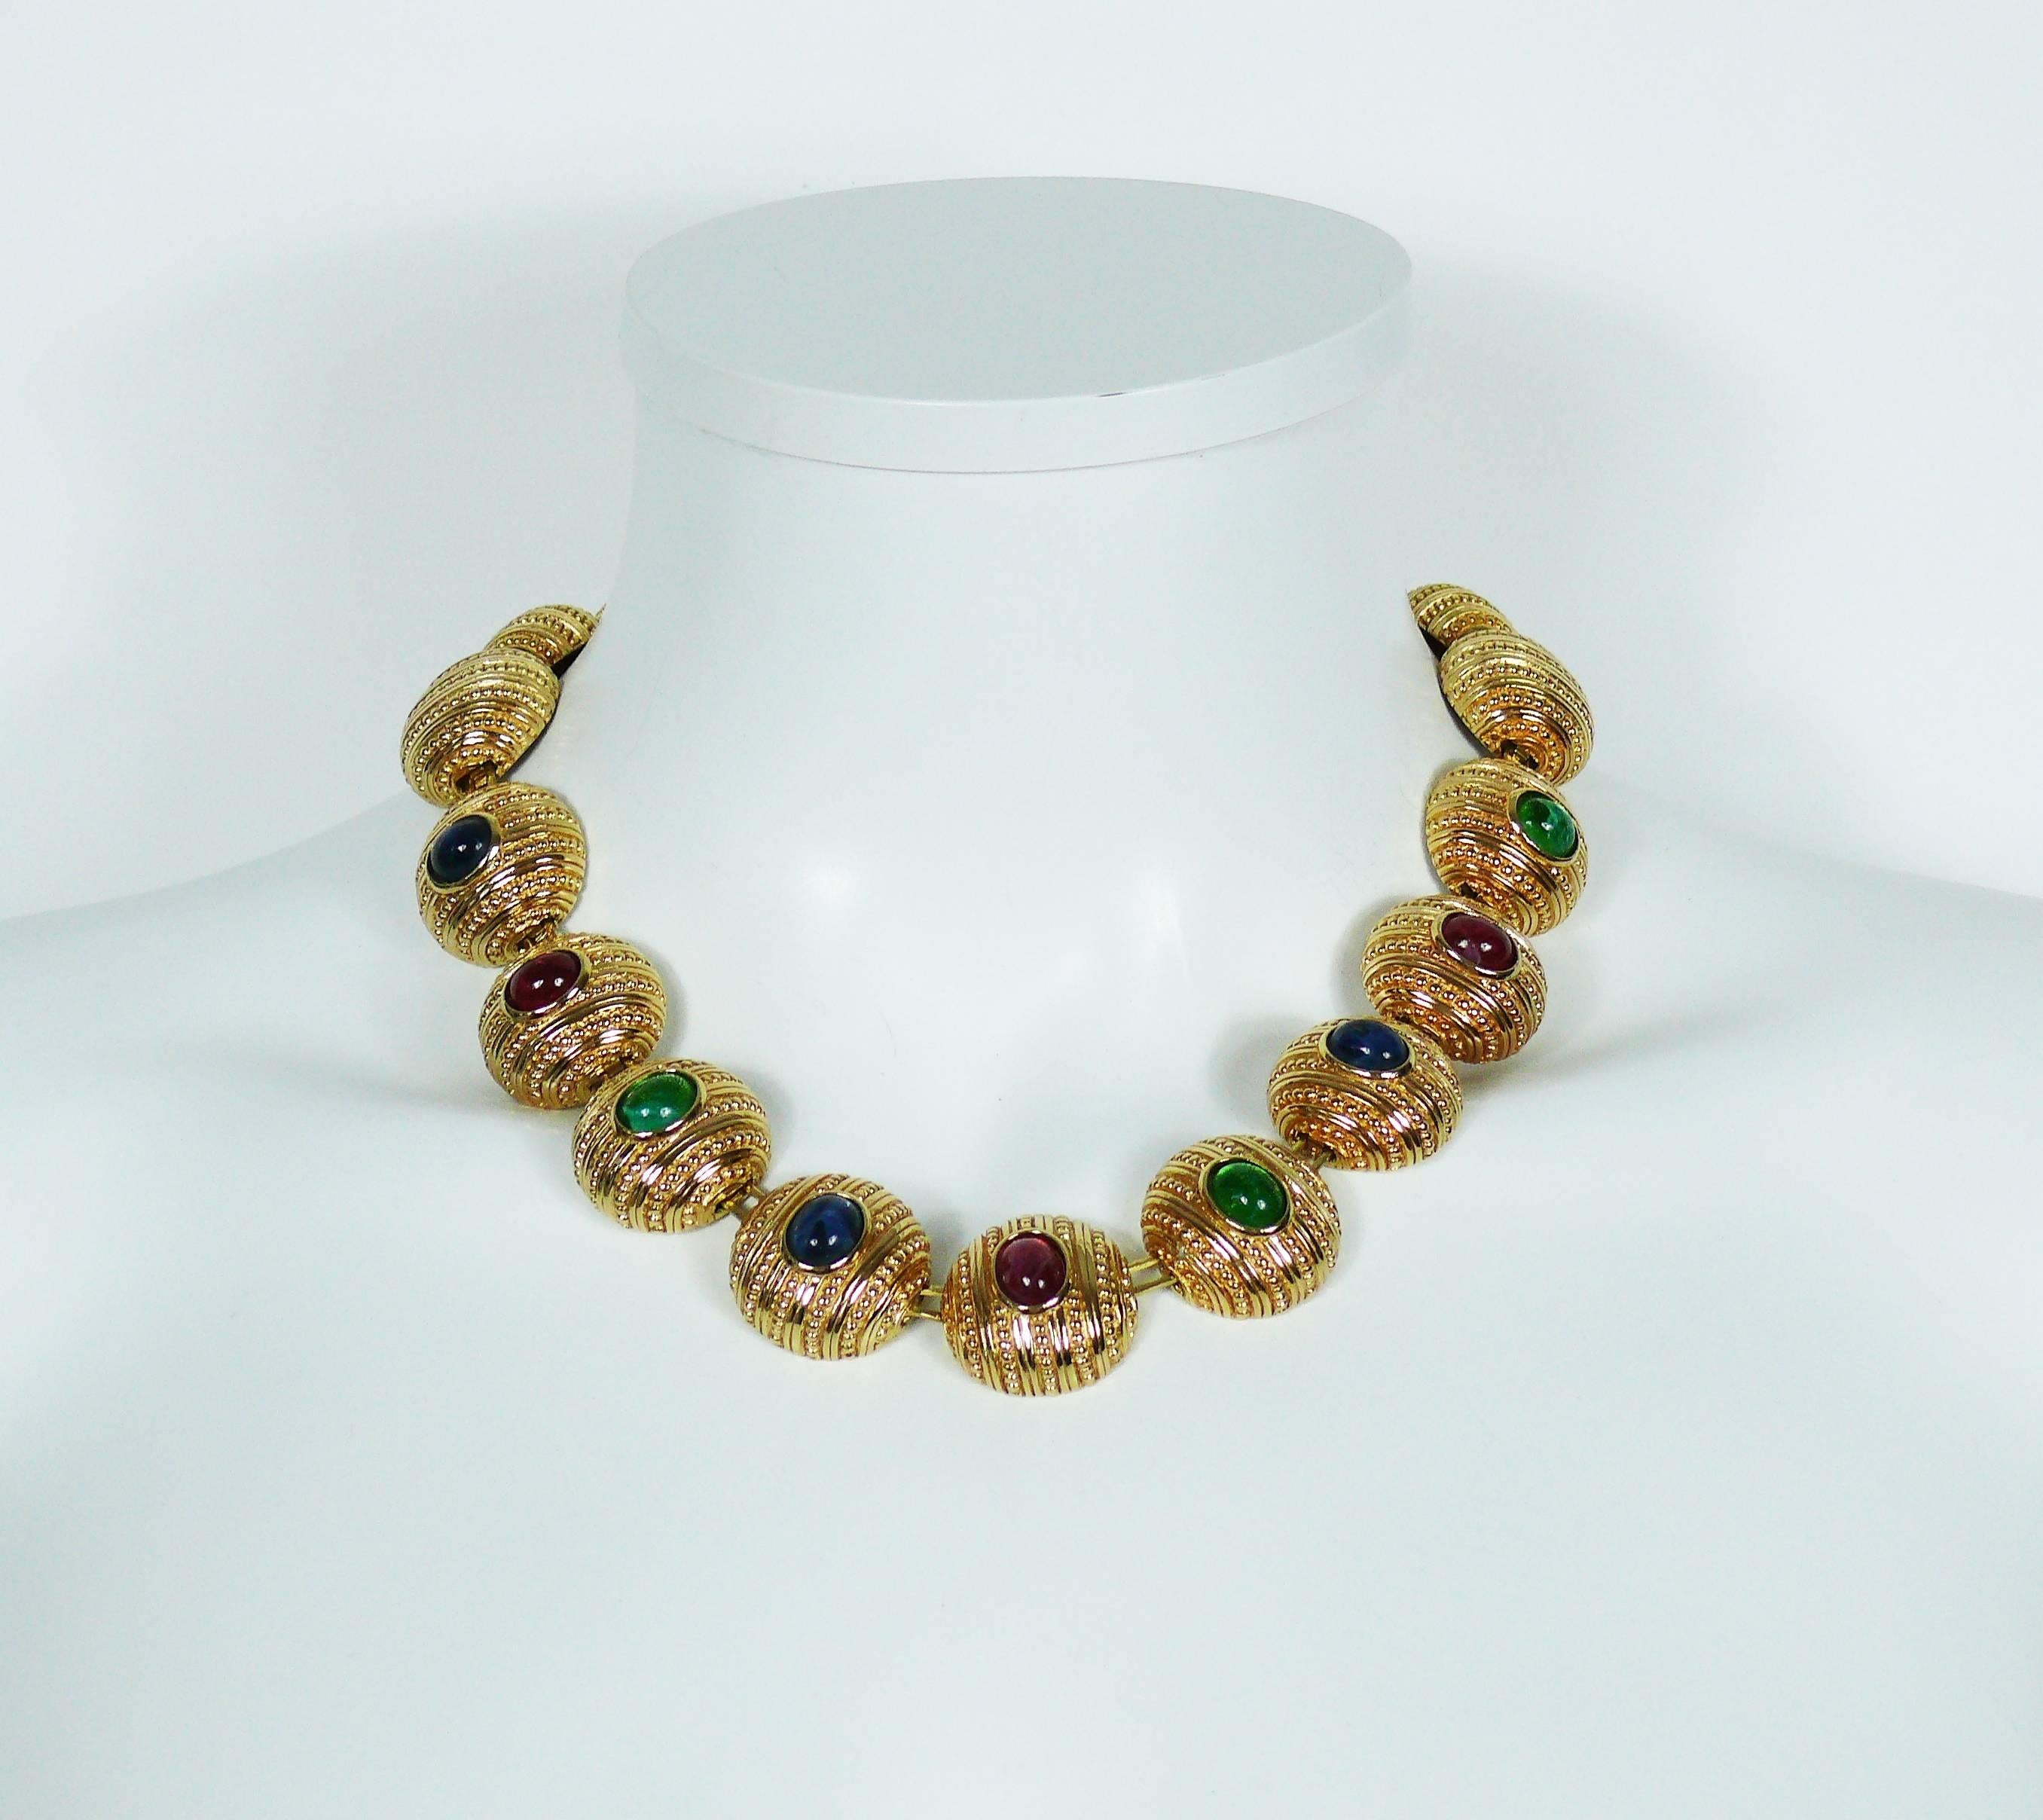 CHRISTIAN DIOR vintage gold tone necklace featuring round domed links embellished with multicolored faux gemstone poured glass cabochons.

Lobster clasp closure.
Extension chain.

Marked CHR. DIOR Germany.

Indicative mesaurements : total length